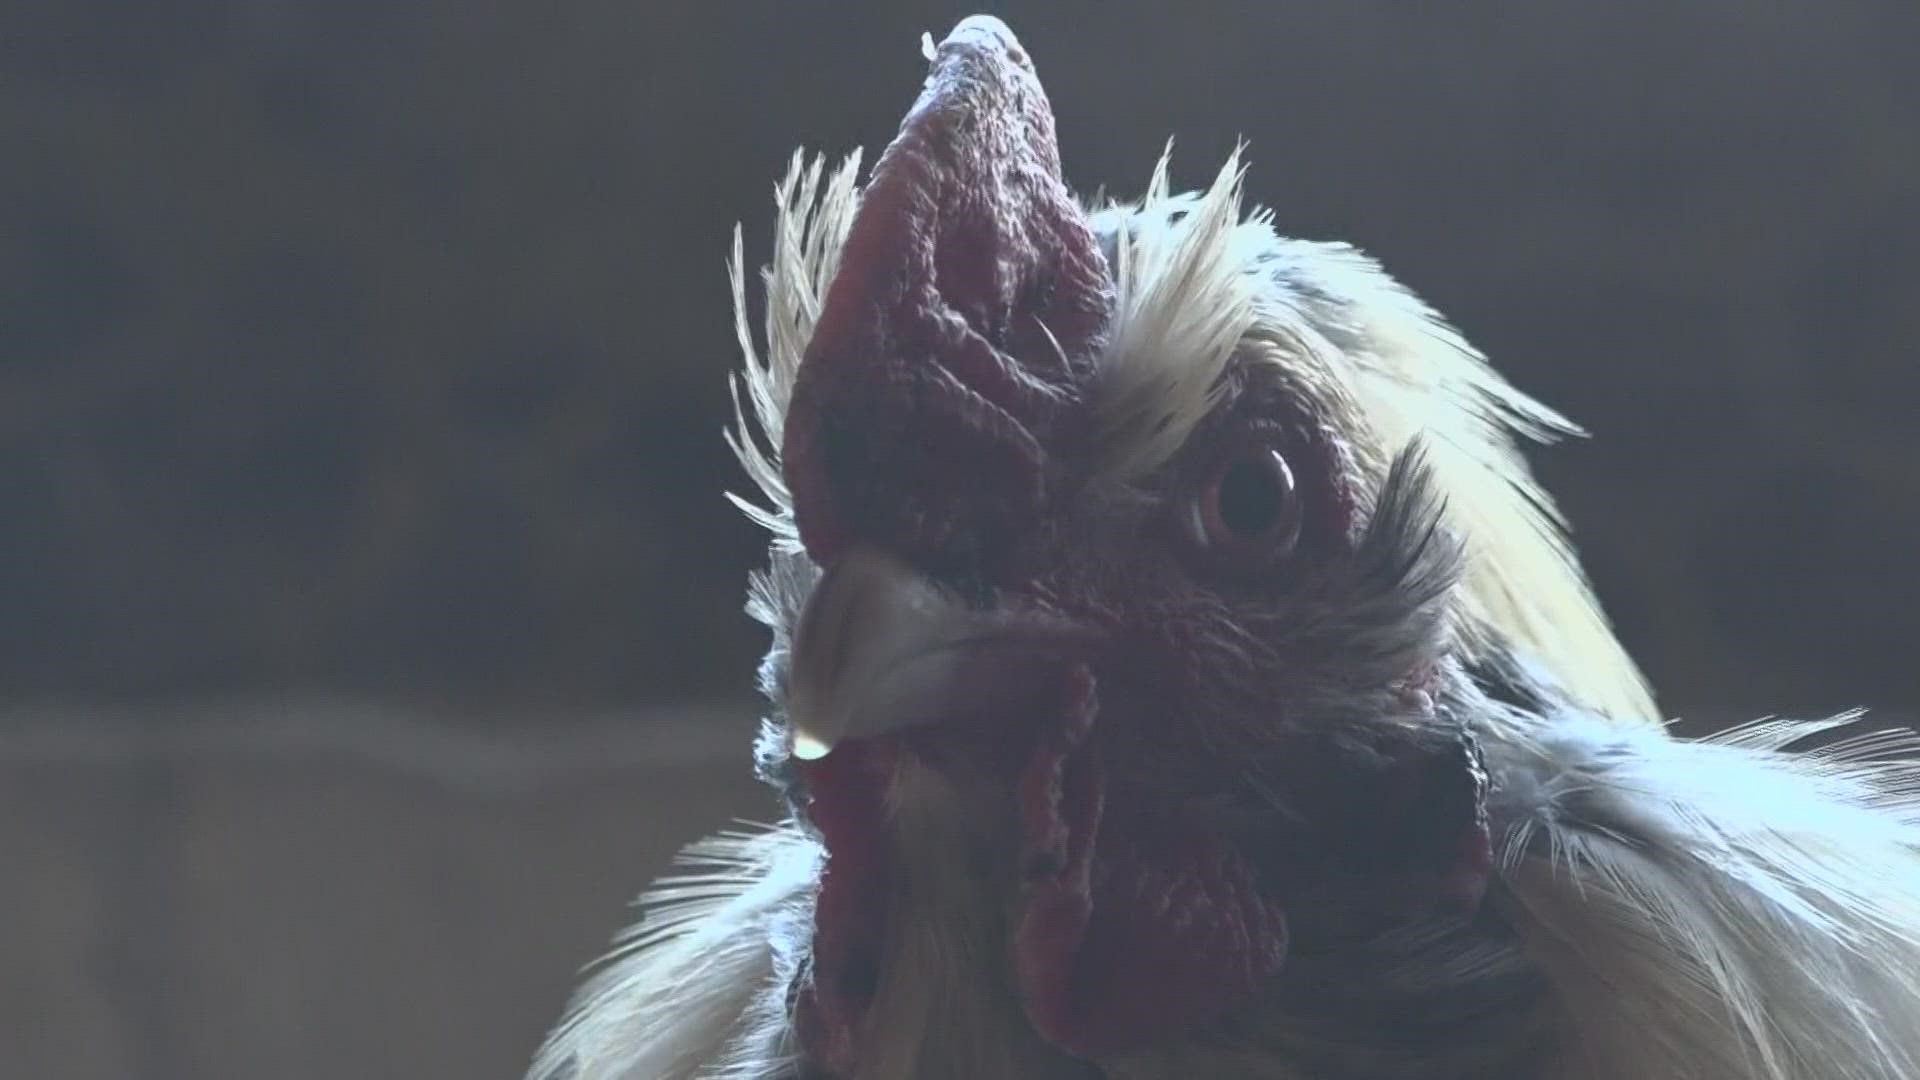 Lizzie Dickerson thought her rooster was gone 'for good' when he went missing last spring.